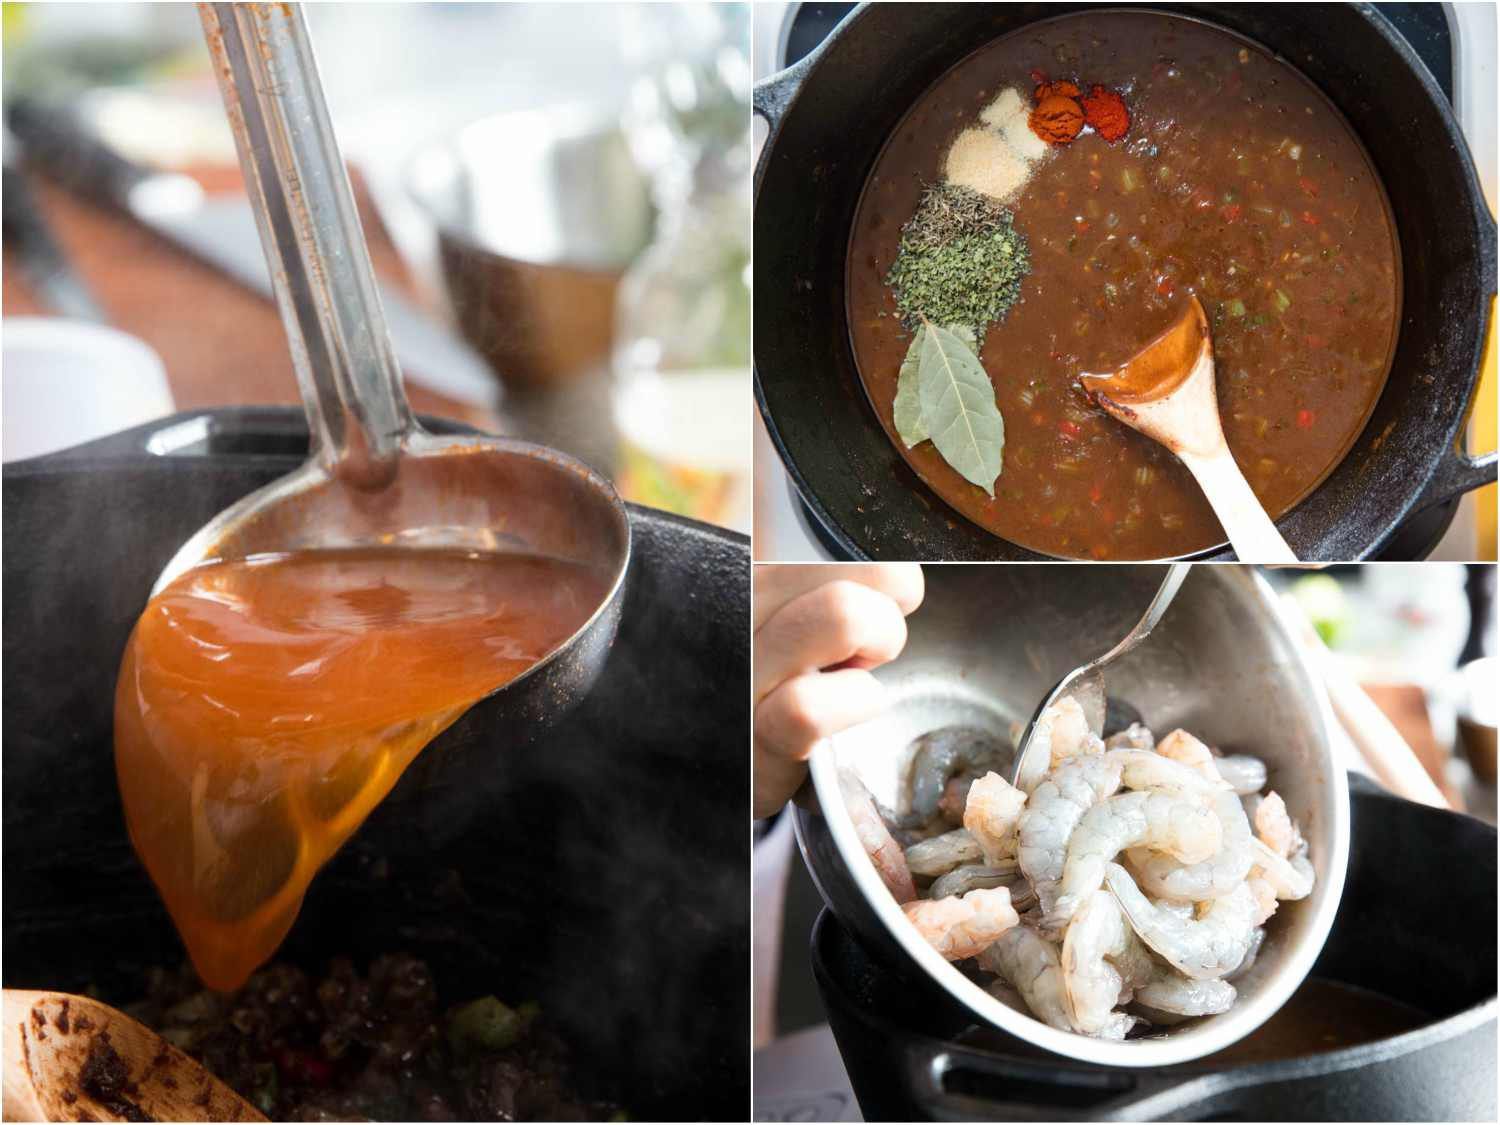 Collage of 3 images: Adding shrimp stock to the pot, adding spices and seasonings to the sauce, stirring in the shrimp.